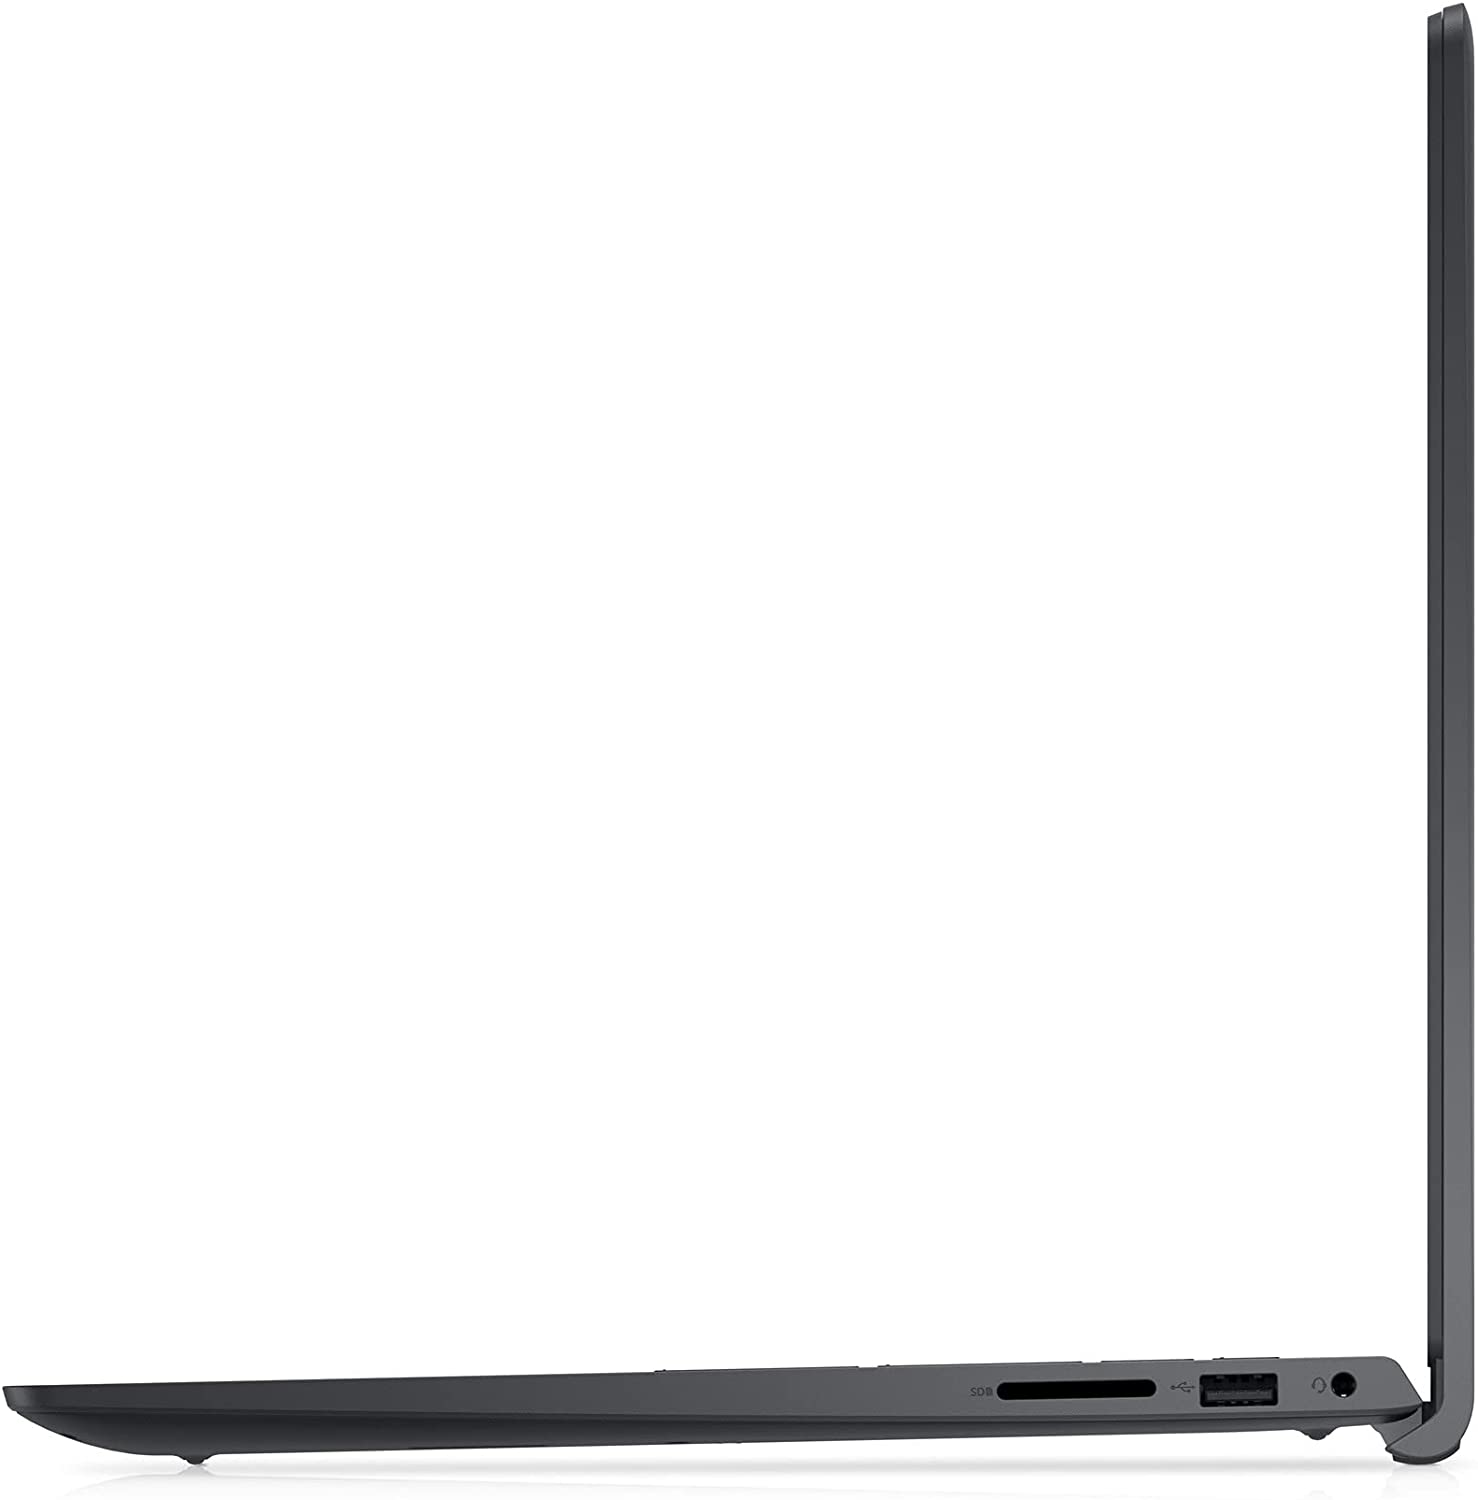 Notebook Dell Inspiron 3511 i5 1135G7 8Gb SSD 256Gb 15.6 Free